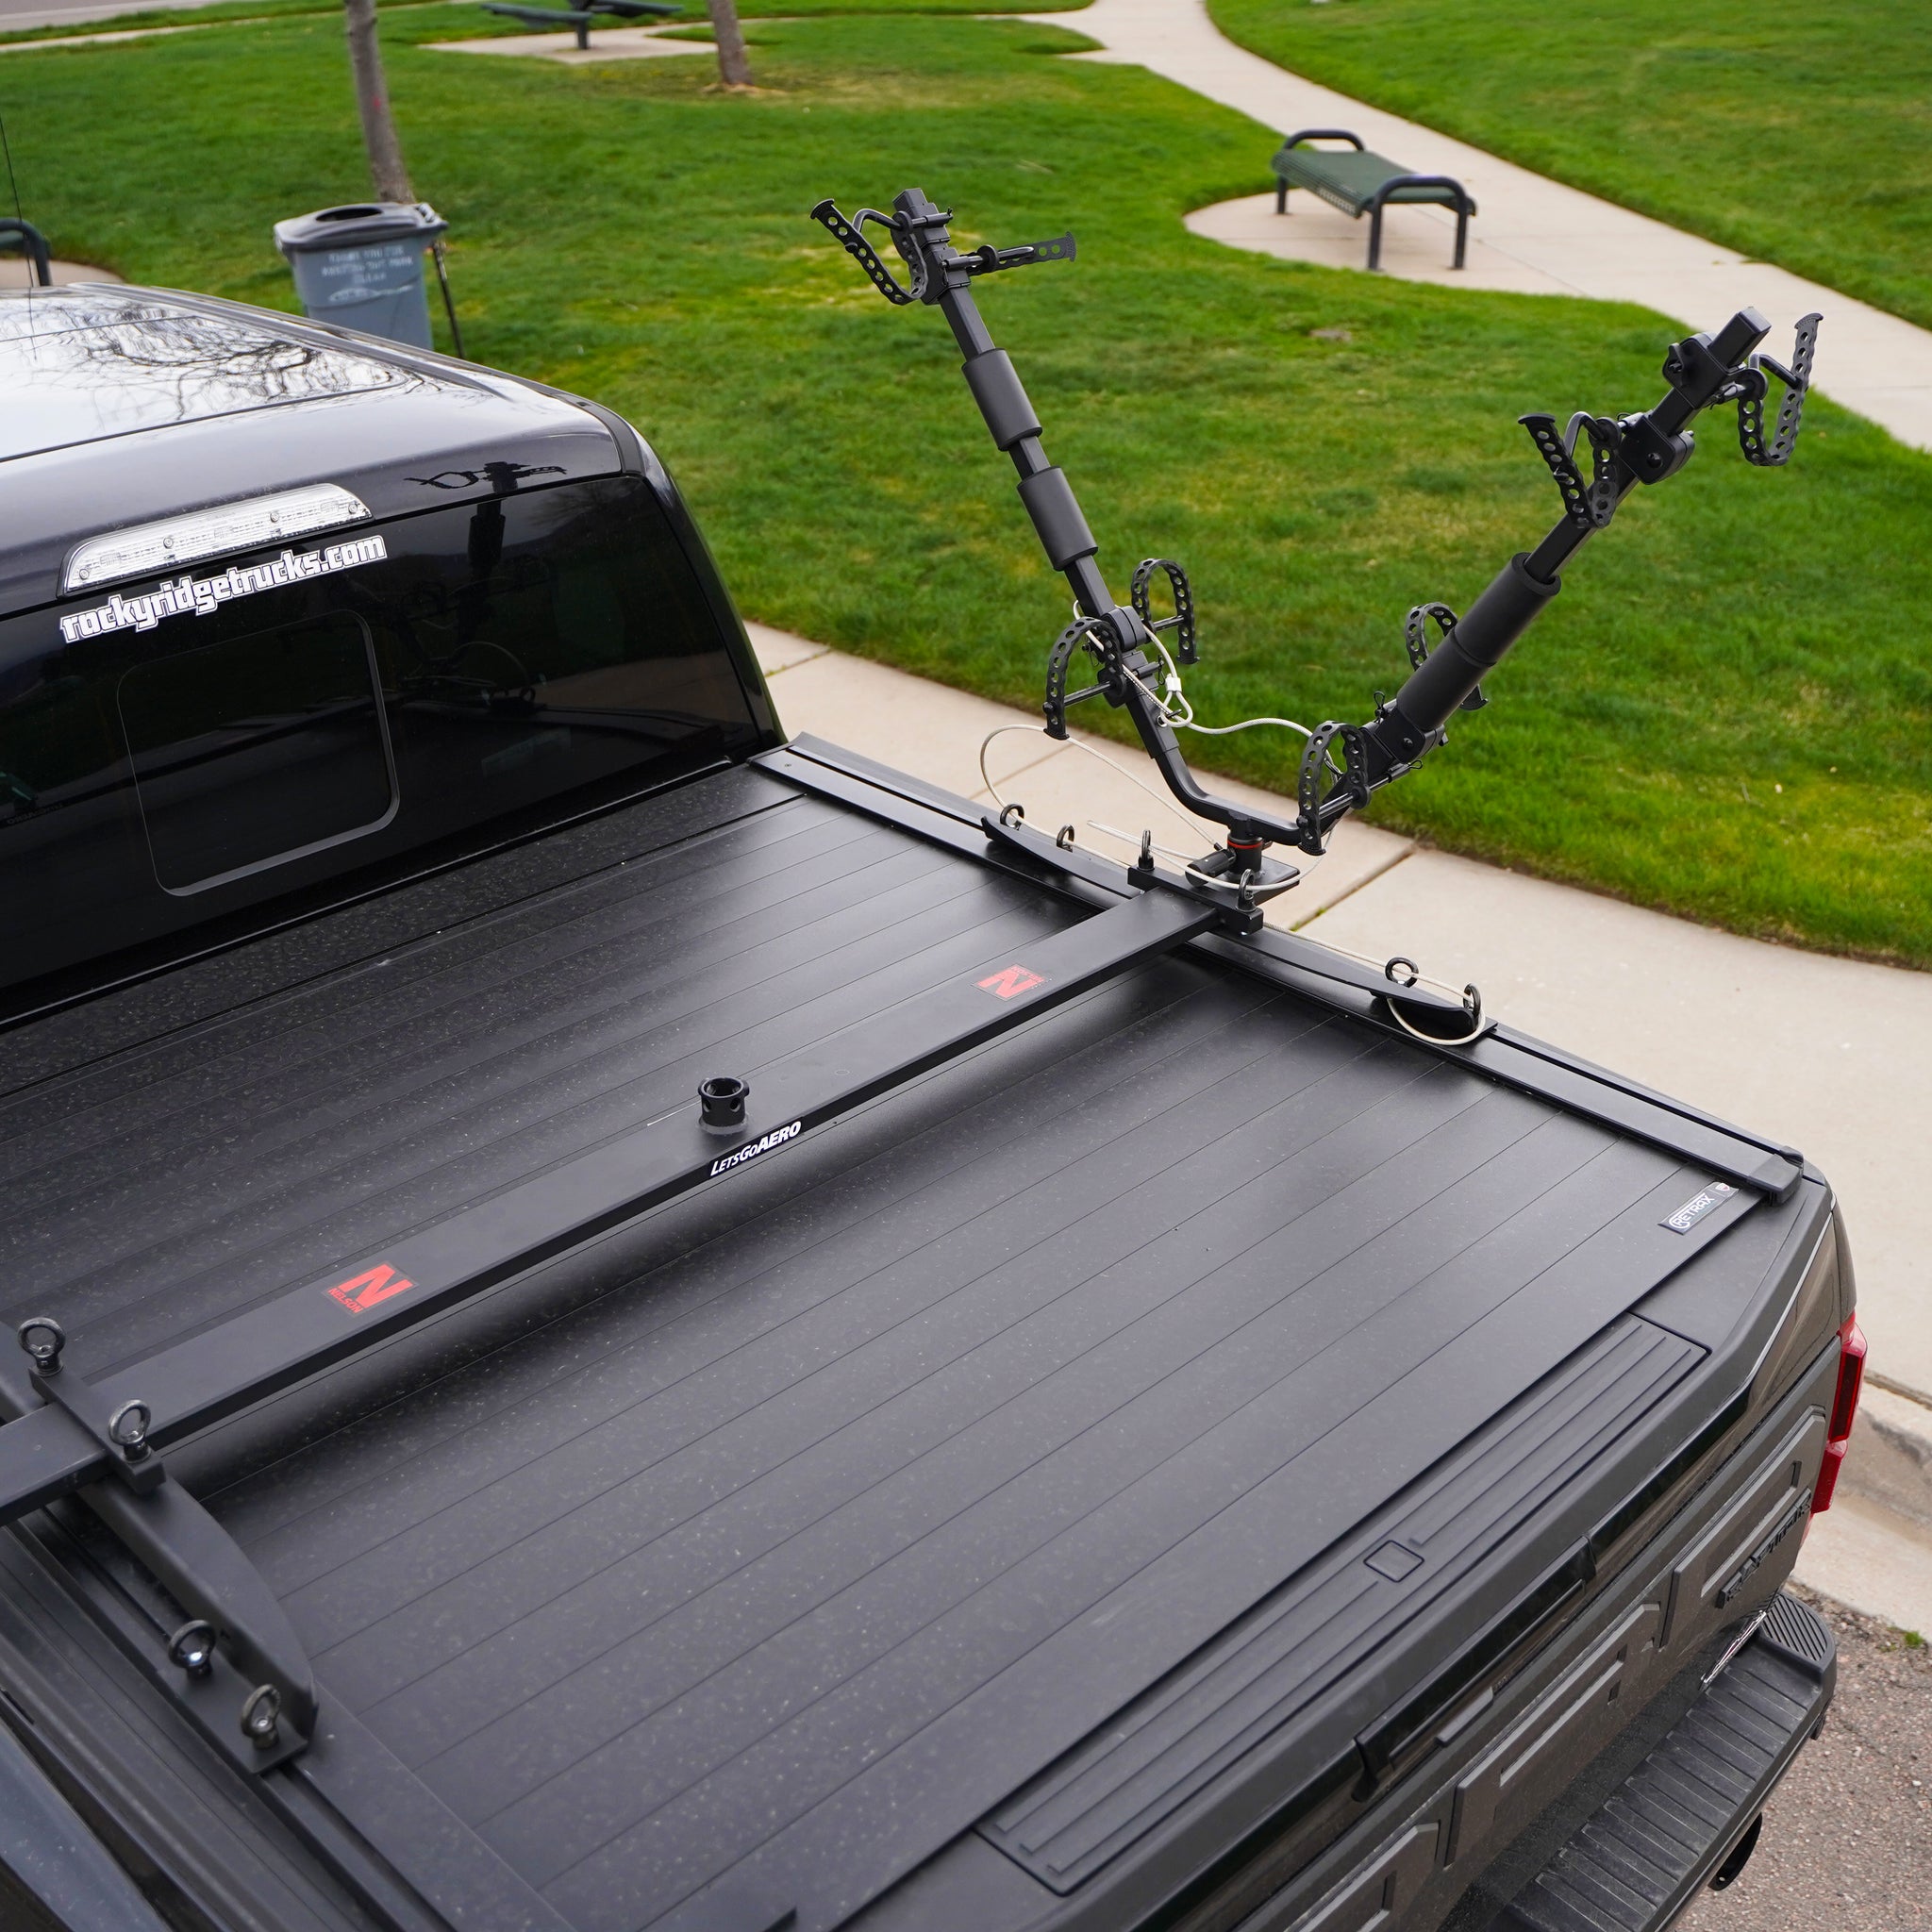 Press Release: Lets Go Aero Introduces Tonneau Cover Adaptor for Nelson Truck Bed V-Rack Carrier